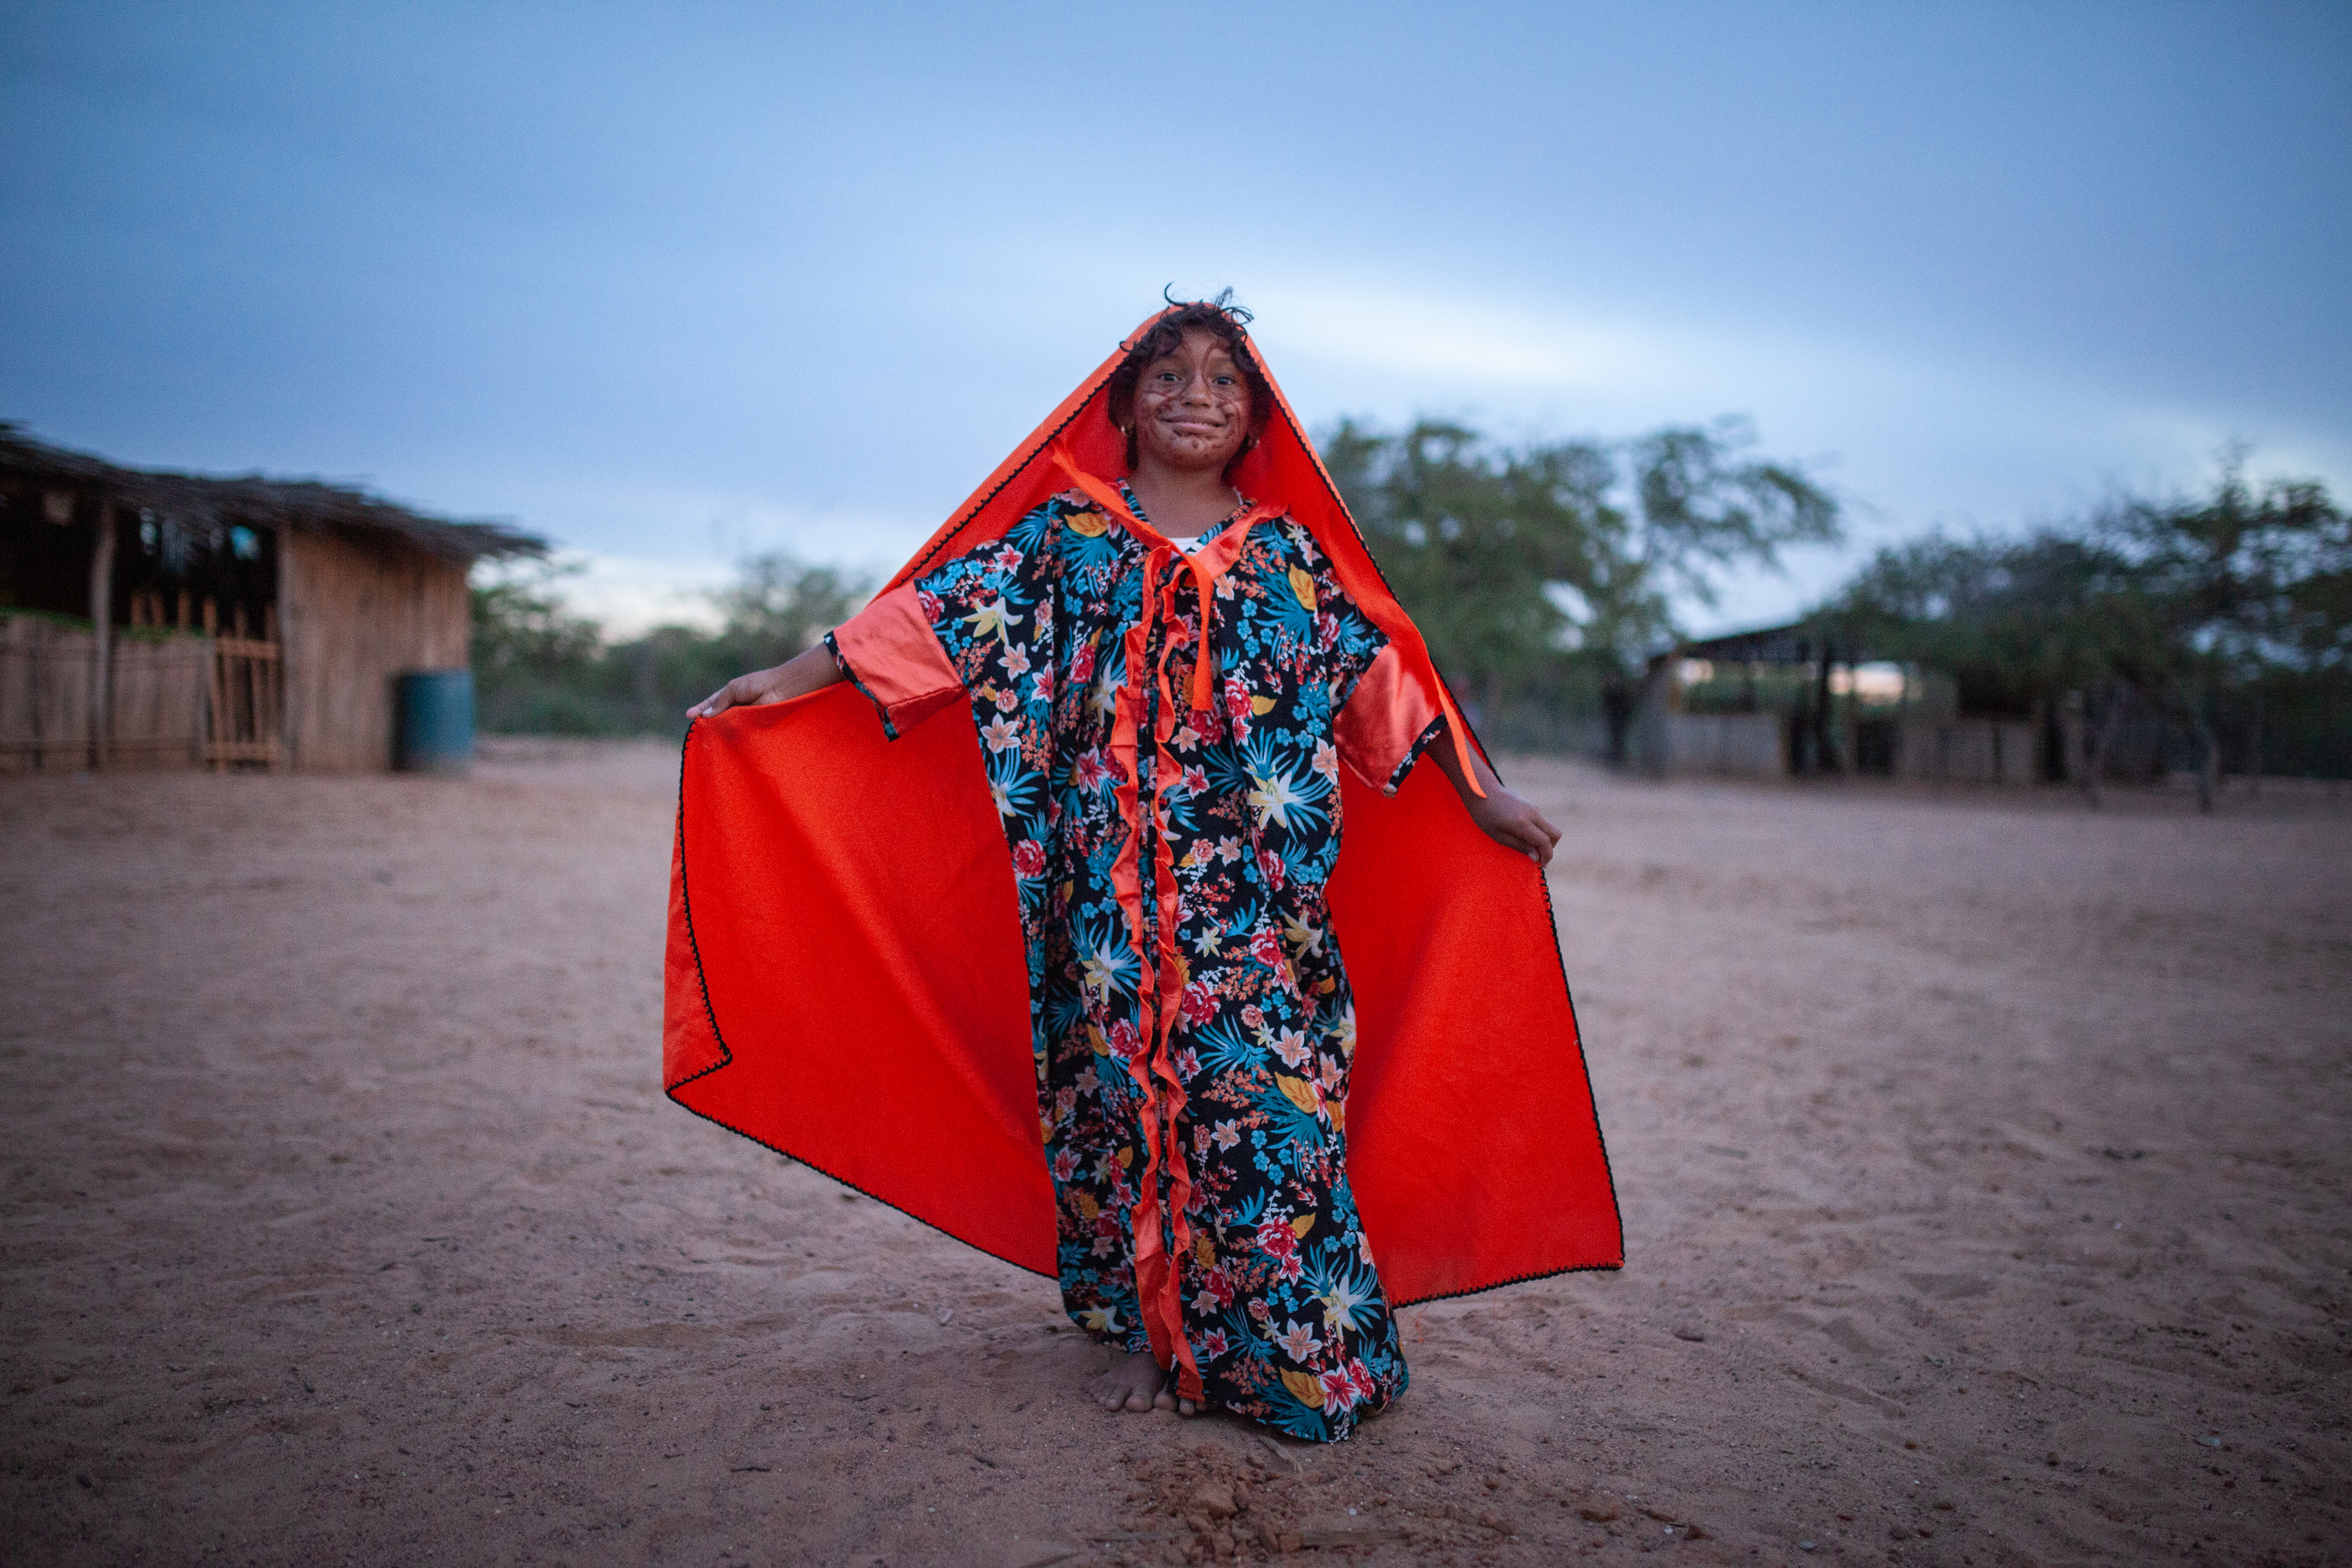 Wayuu indigenous girls dazzle in traditional mosaic dresses in Colombia